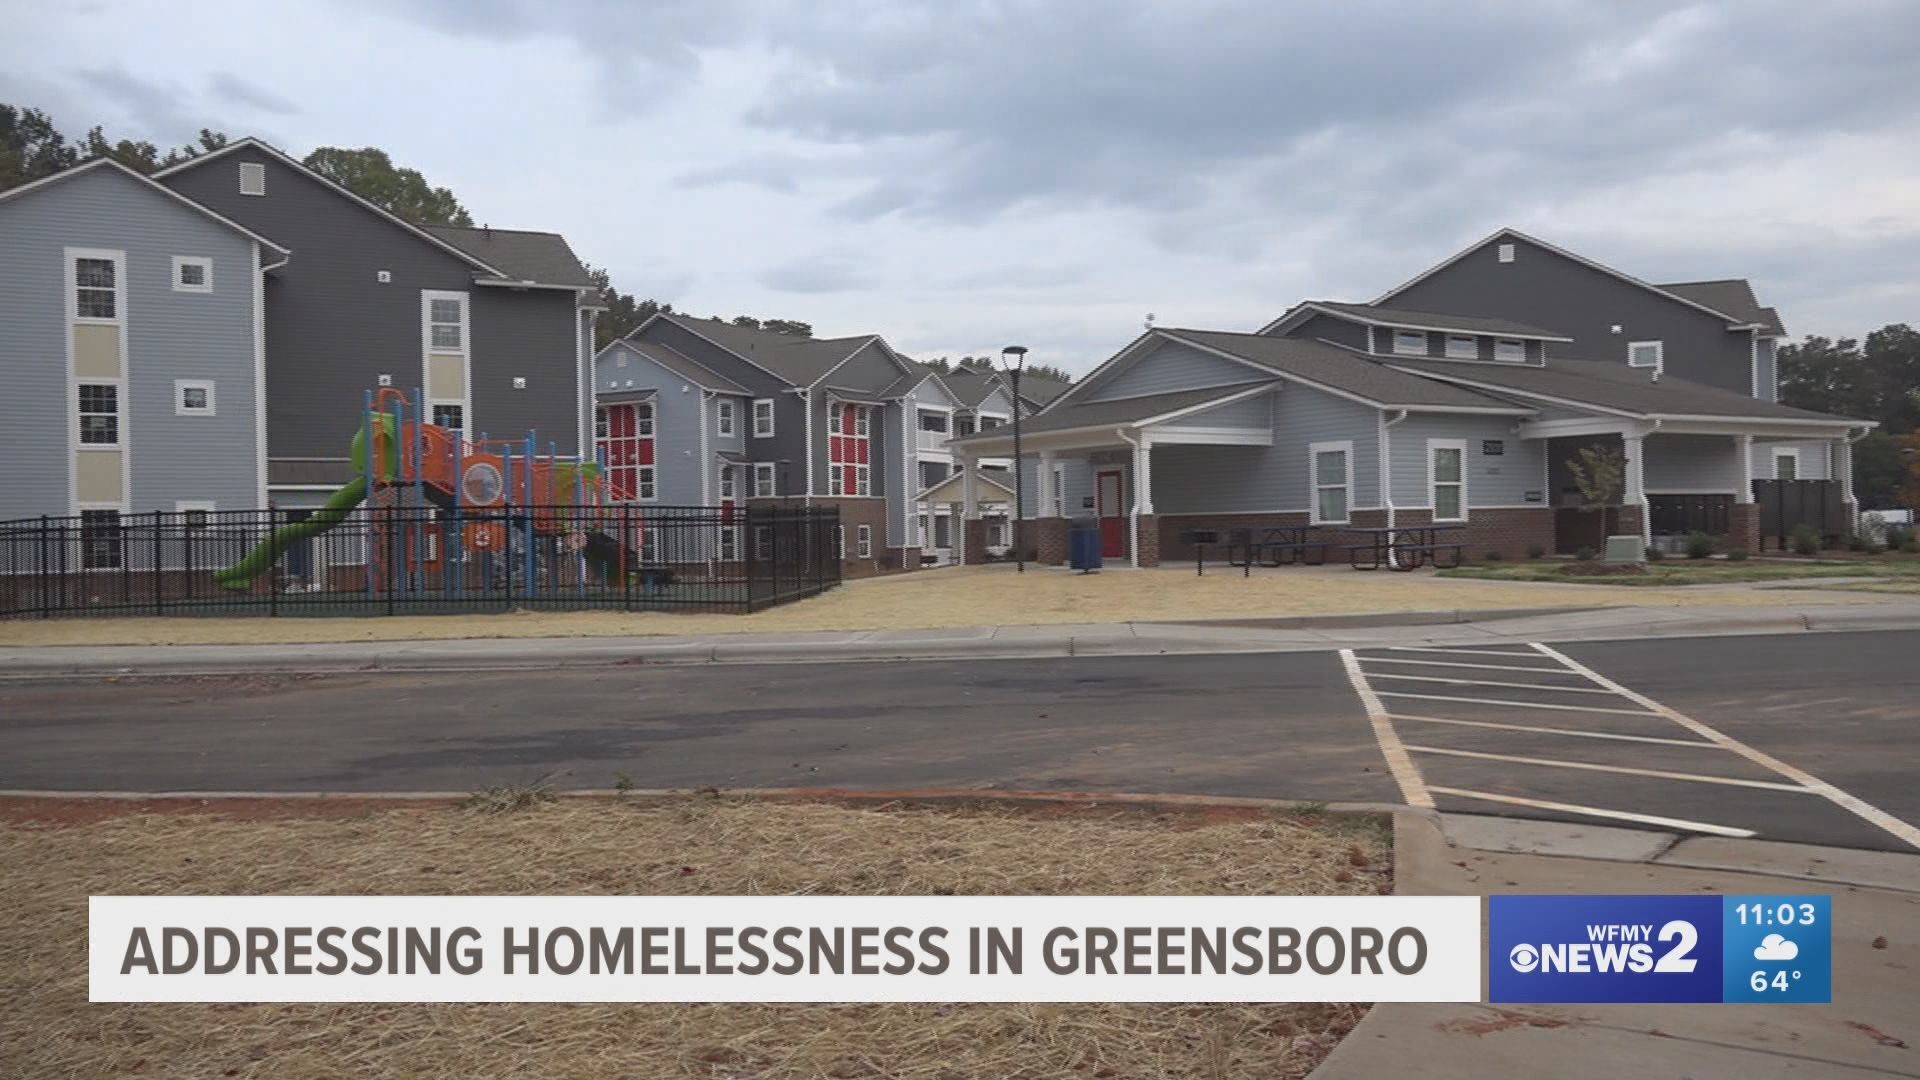 Greensboro is doing a few new things to help those facing homelessness. Some ideas include affordable apartments and safe parking lots for those living in their car.